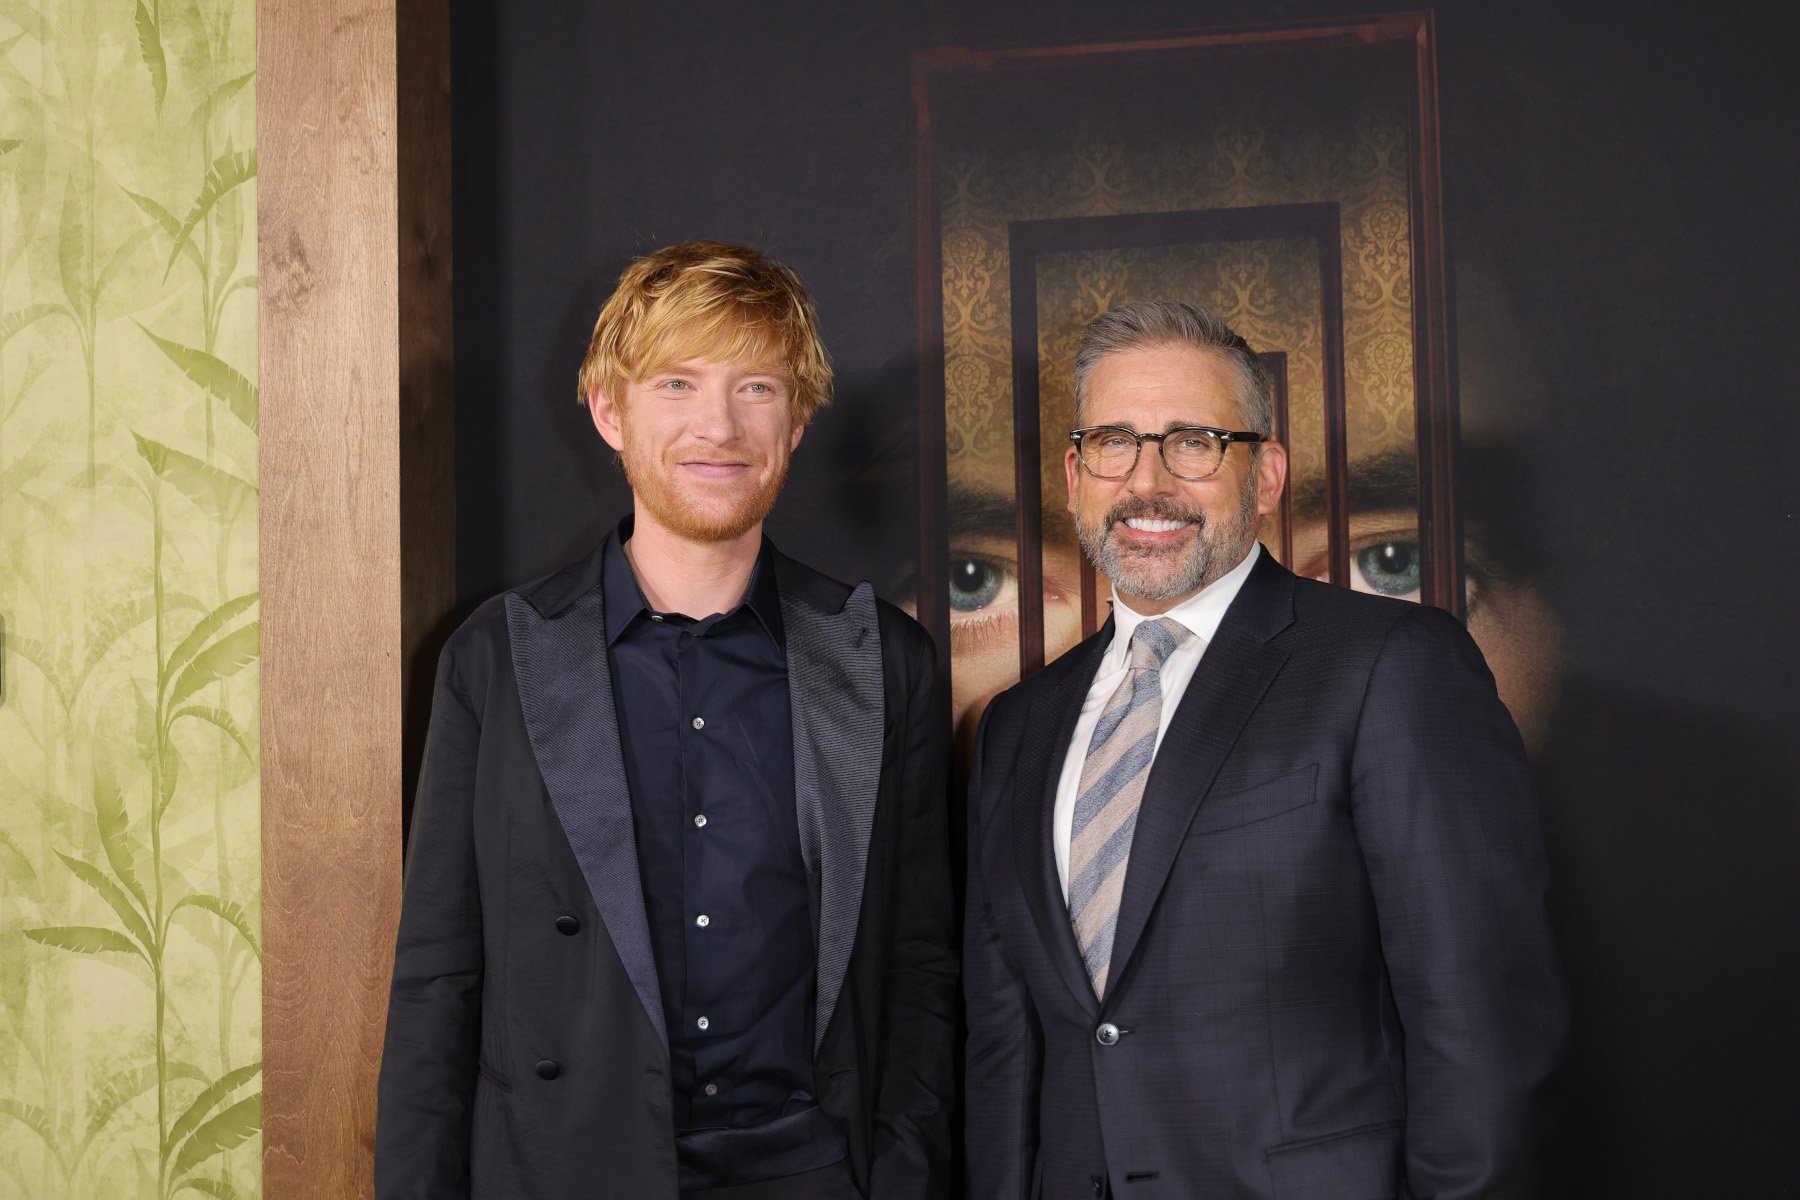 ‘The Patient’: Domhnall Gleeson’s Takeaway Is That He Wants ‘to Be More Like Steve Carell’